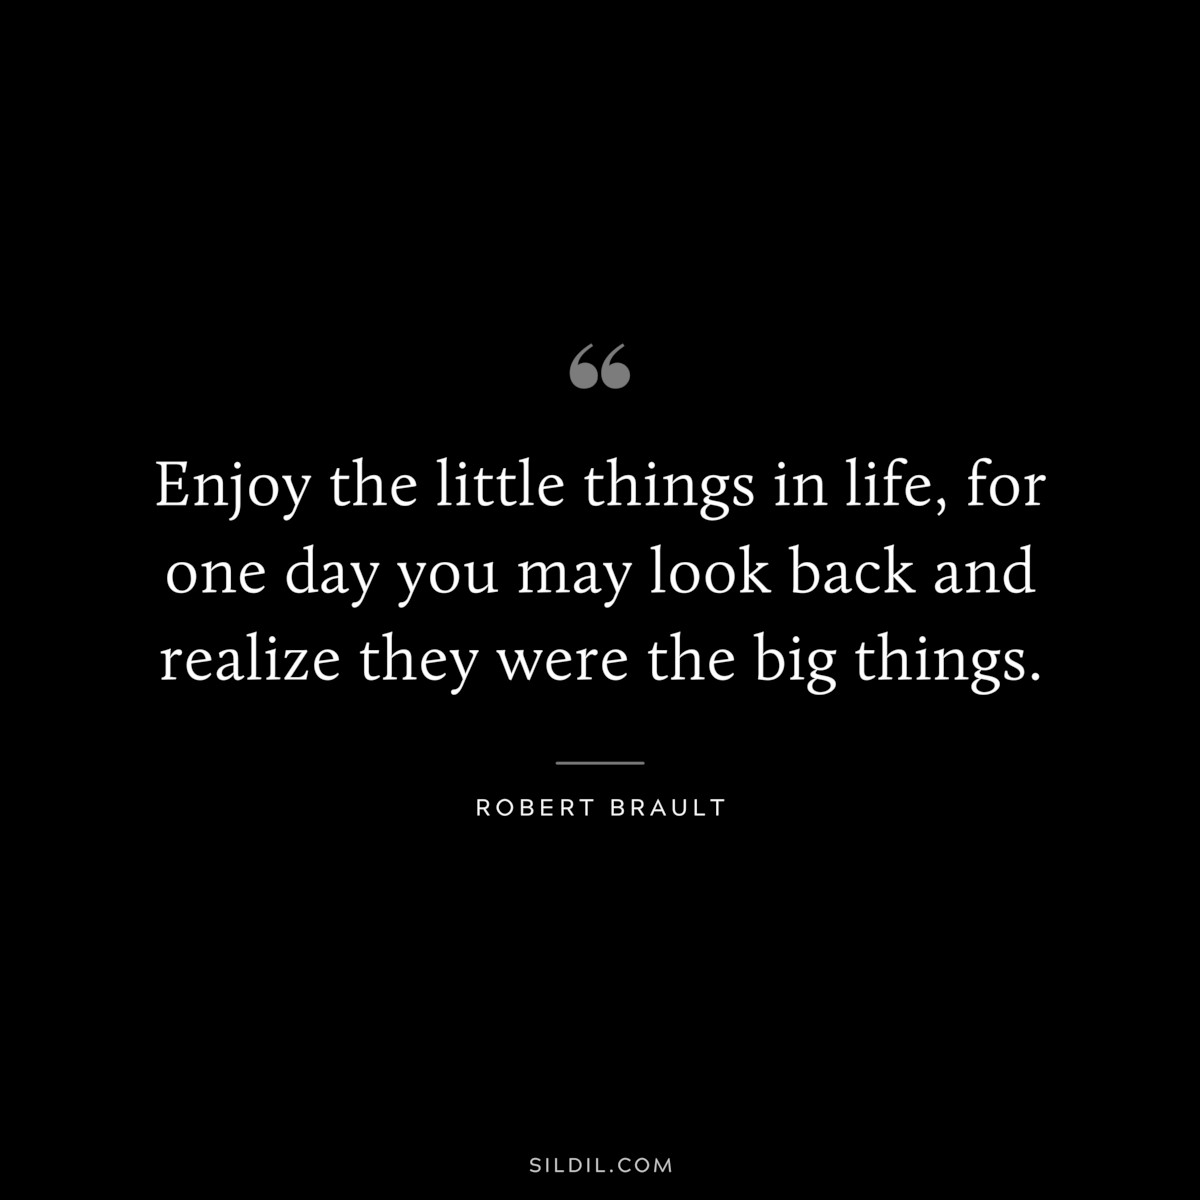 Enjoy the little things in life, for one day you may look back and realize they were the big things. ― Robert Brault